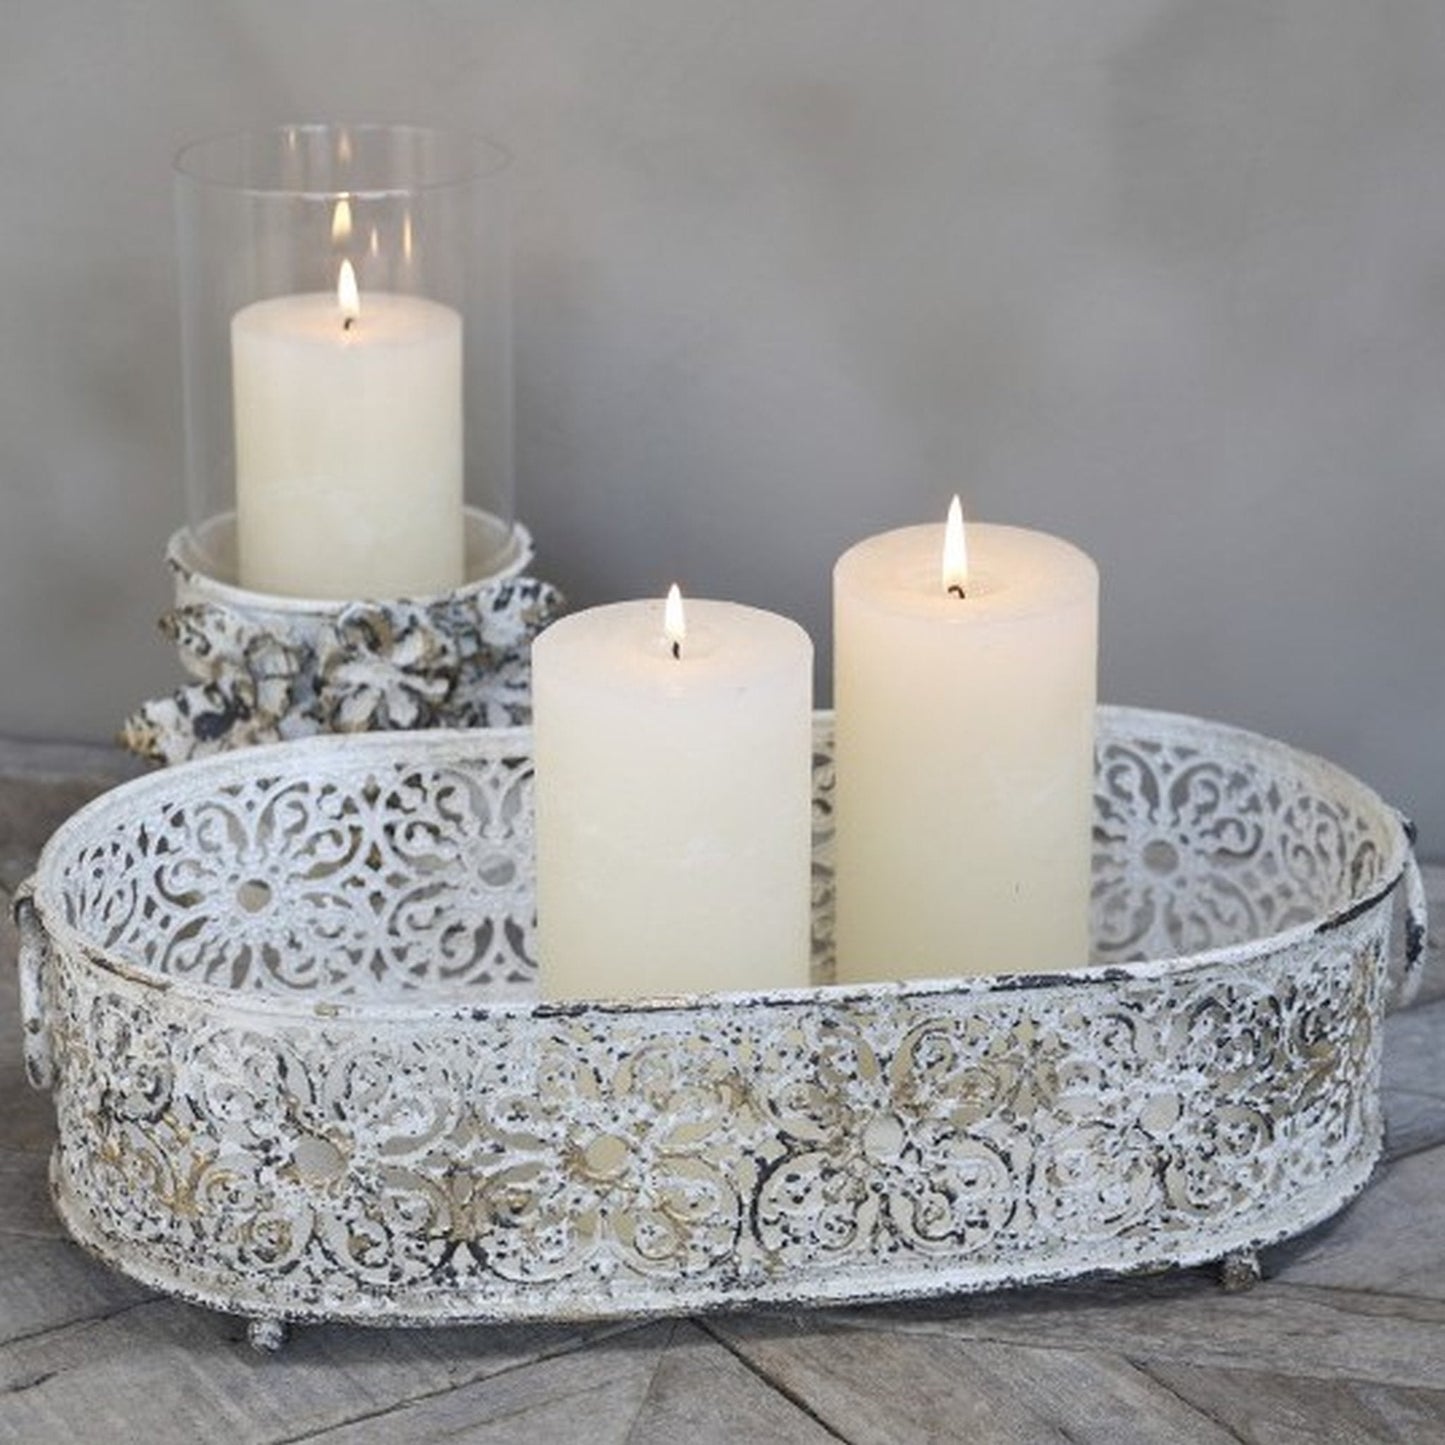 Lace Design Tray Candle Holder - Bumble Living